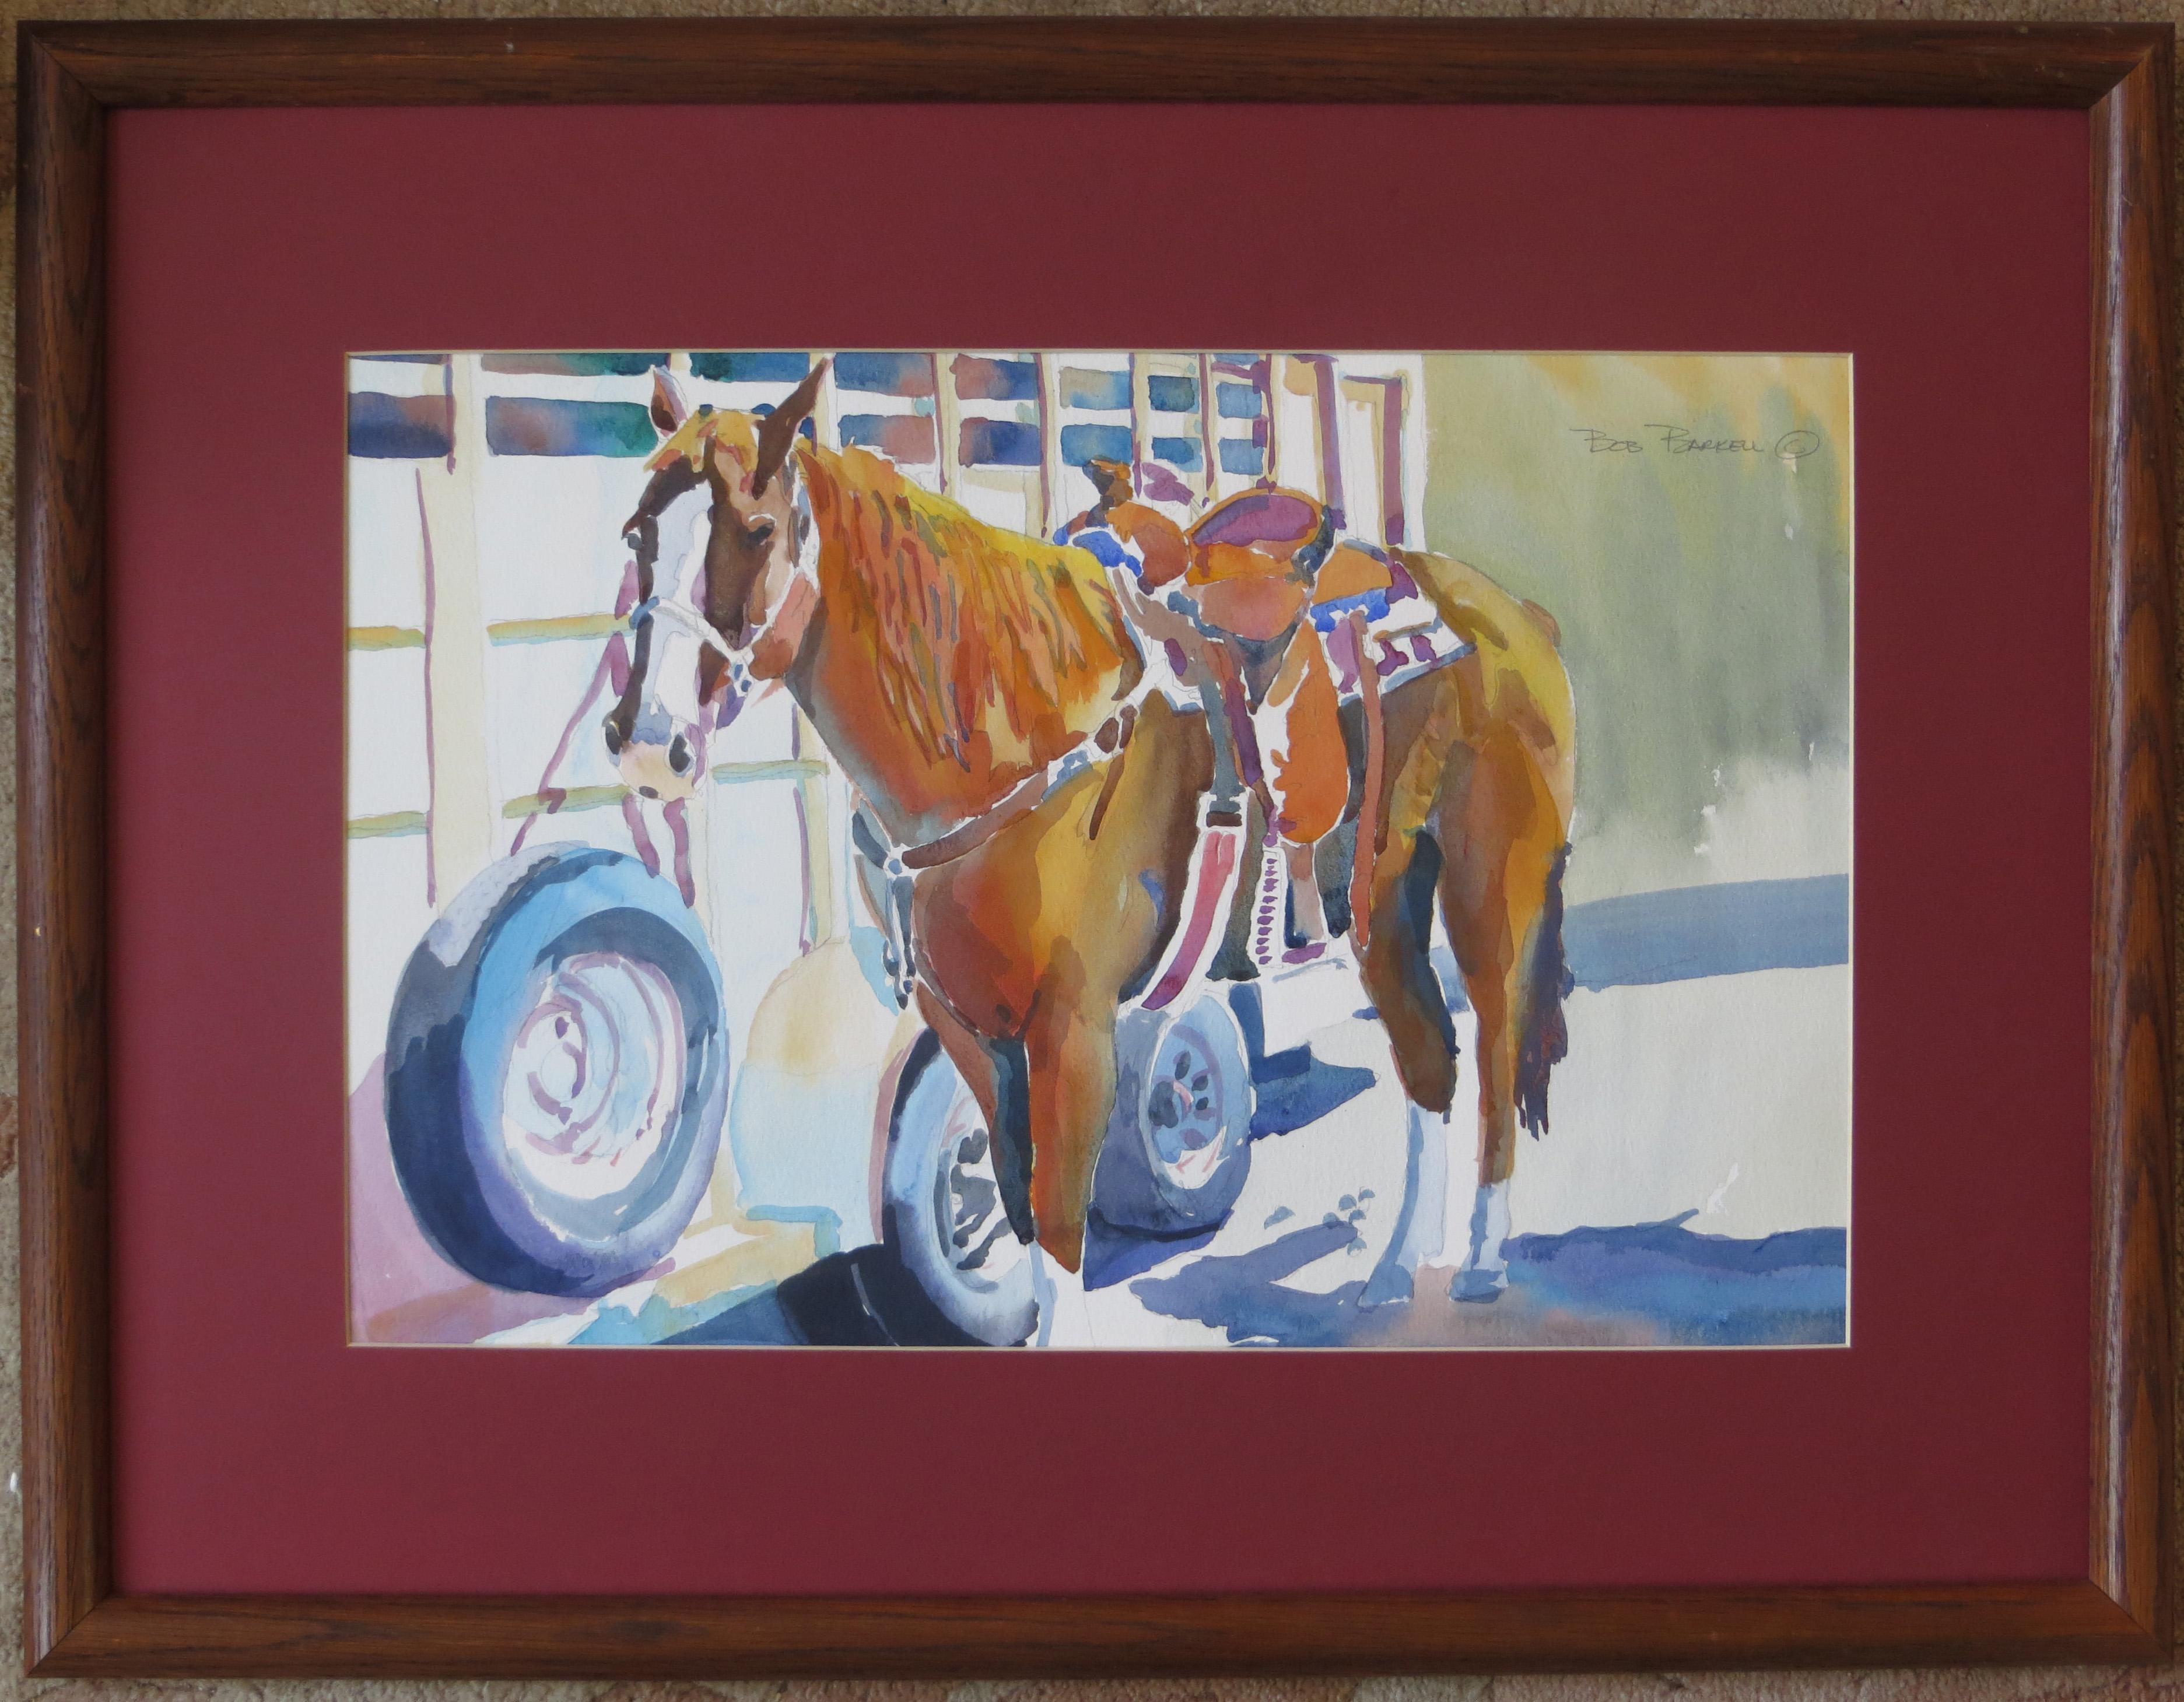 Artist: Bob Barkell – American (1950- )
Title: Lookin’ for Love
Year: circa 1990
Medium: Watercolor
Sight size: 11.75 x 17.75 inches. 
Framed size: 19.5 x 25.5 inches 
Signature: Signed upper right
Condition: Very good 
Frame: Framed in original